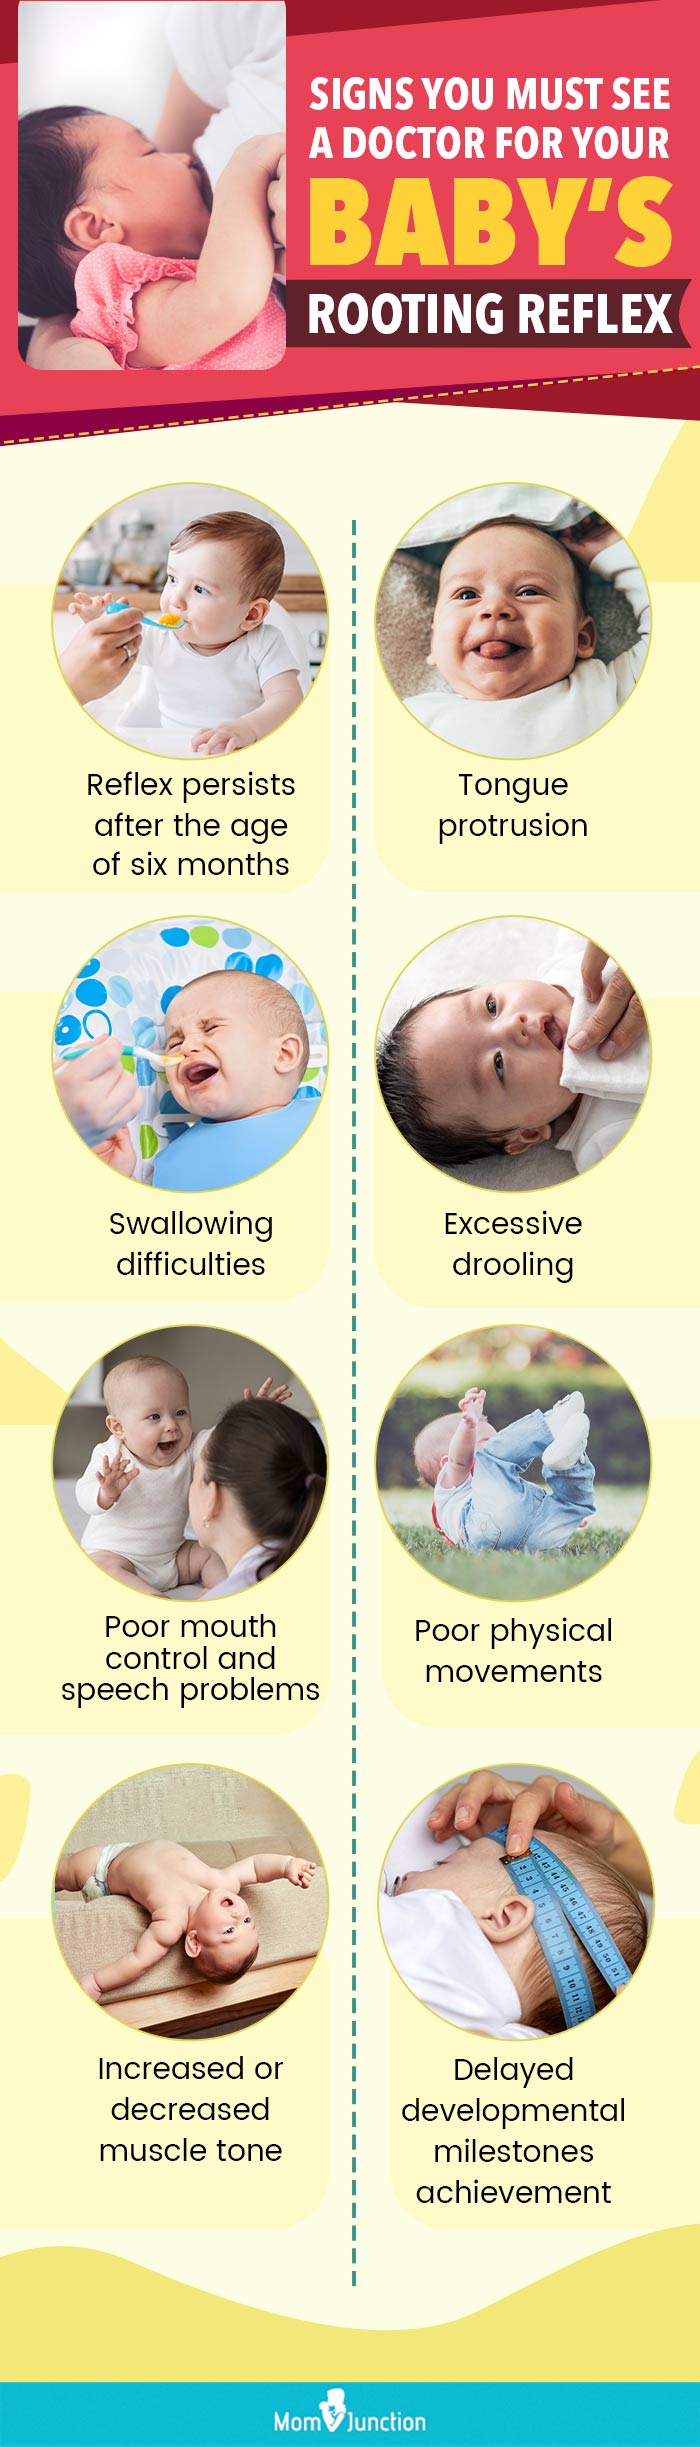 signs you must see a doctor for your baby’s rooting reflex (infographic)